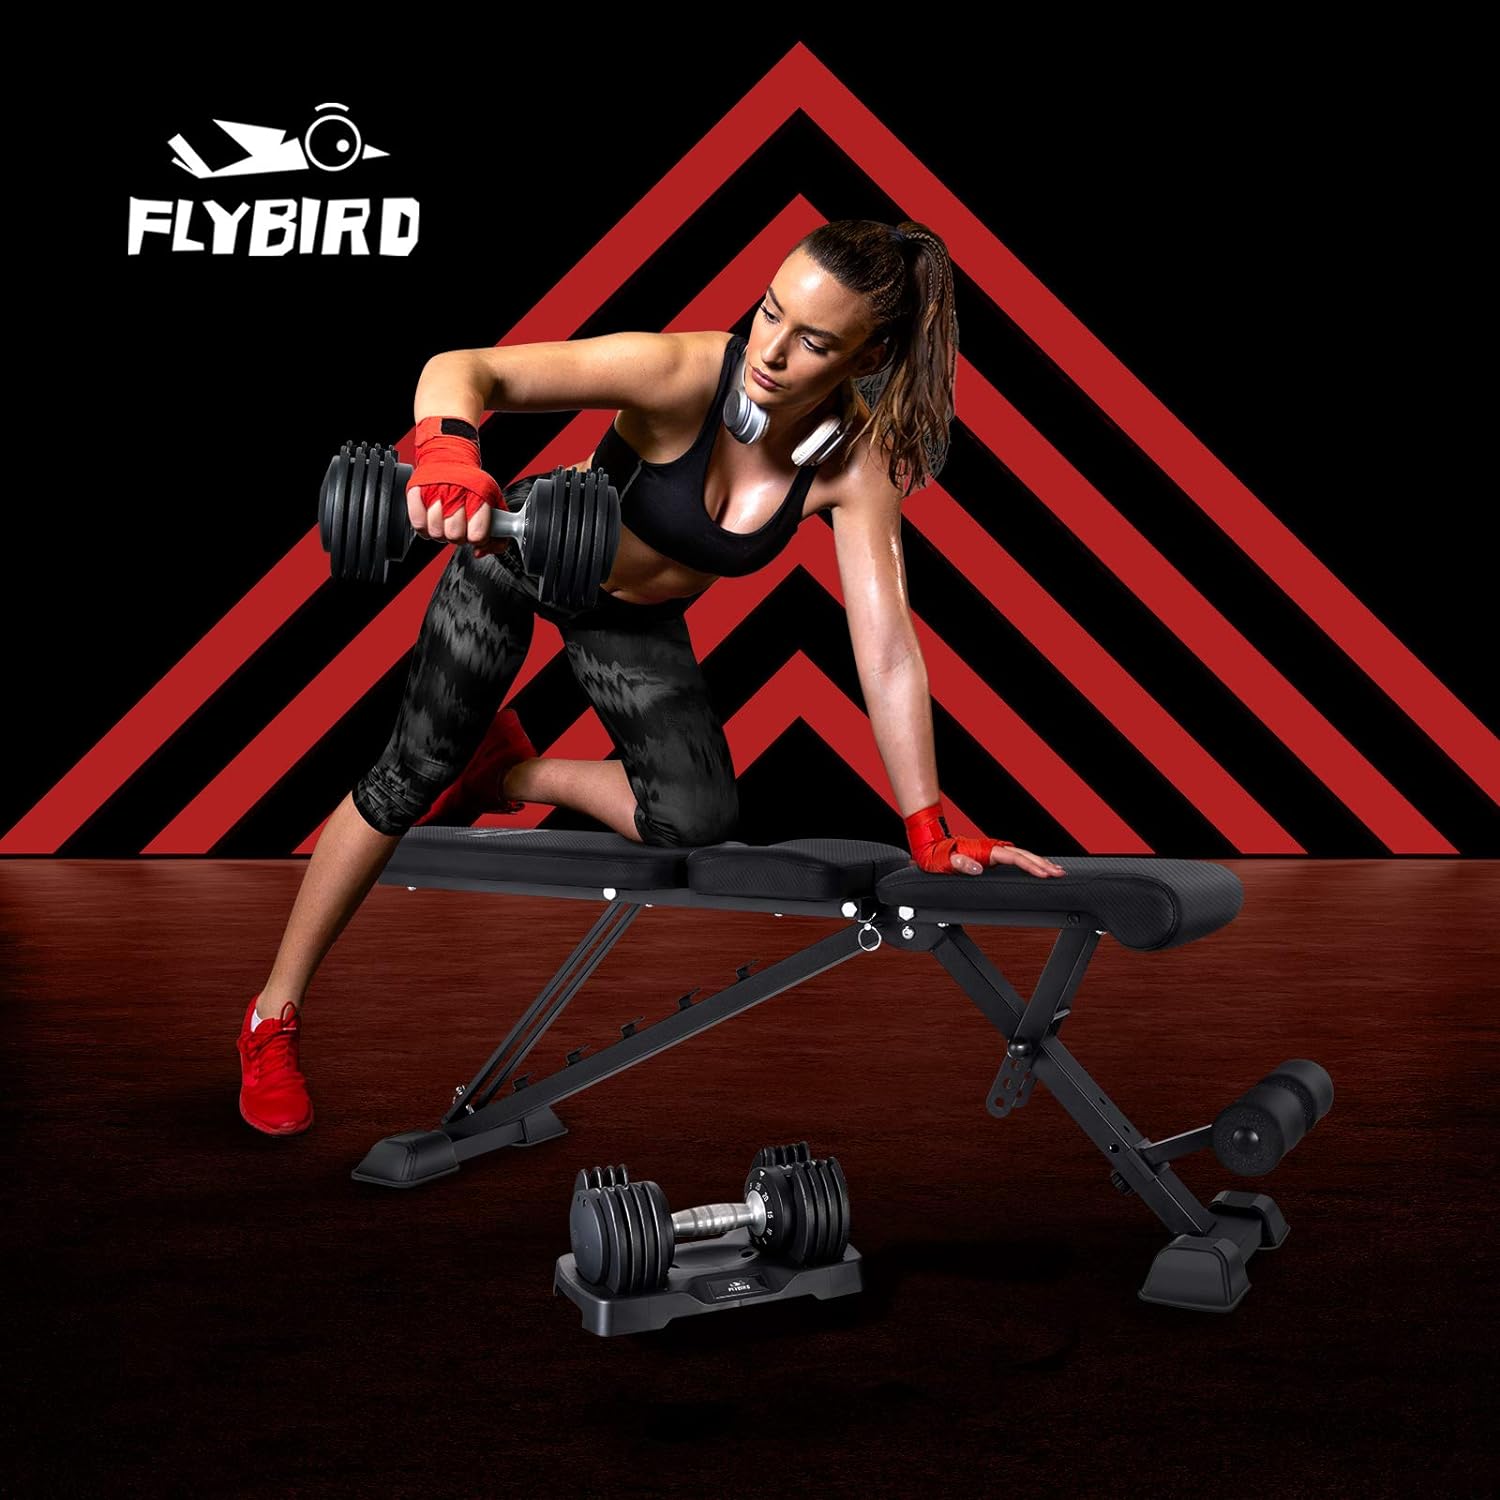 FLYBIRD Workout Bench, Adjustable Weight Bench Folding Weight Bench, Easy to Use Sturdy Durable for Home Gym Dumbbell Exercise, Red/Waist Version